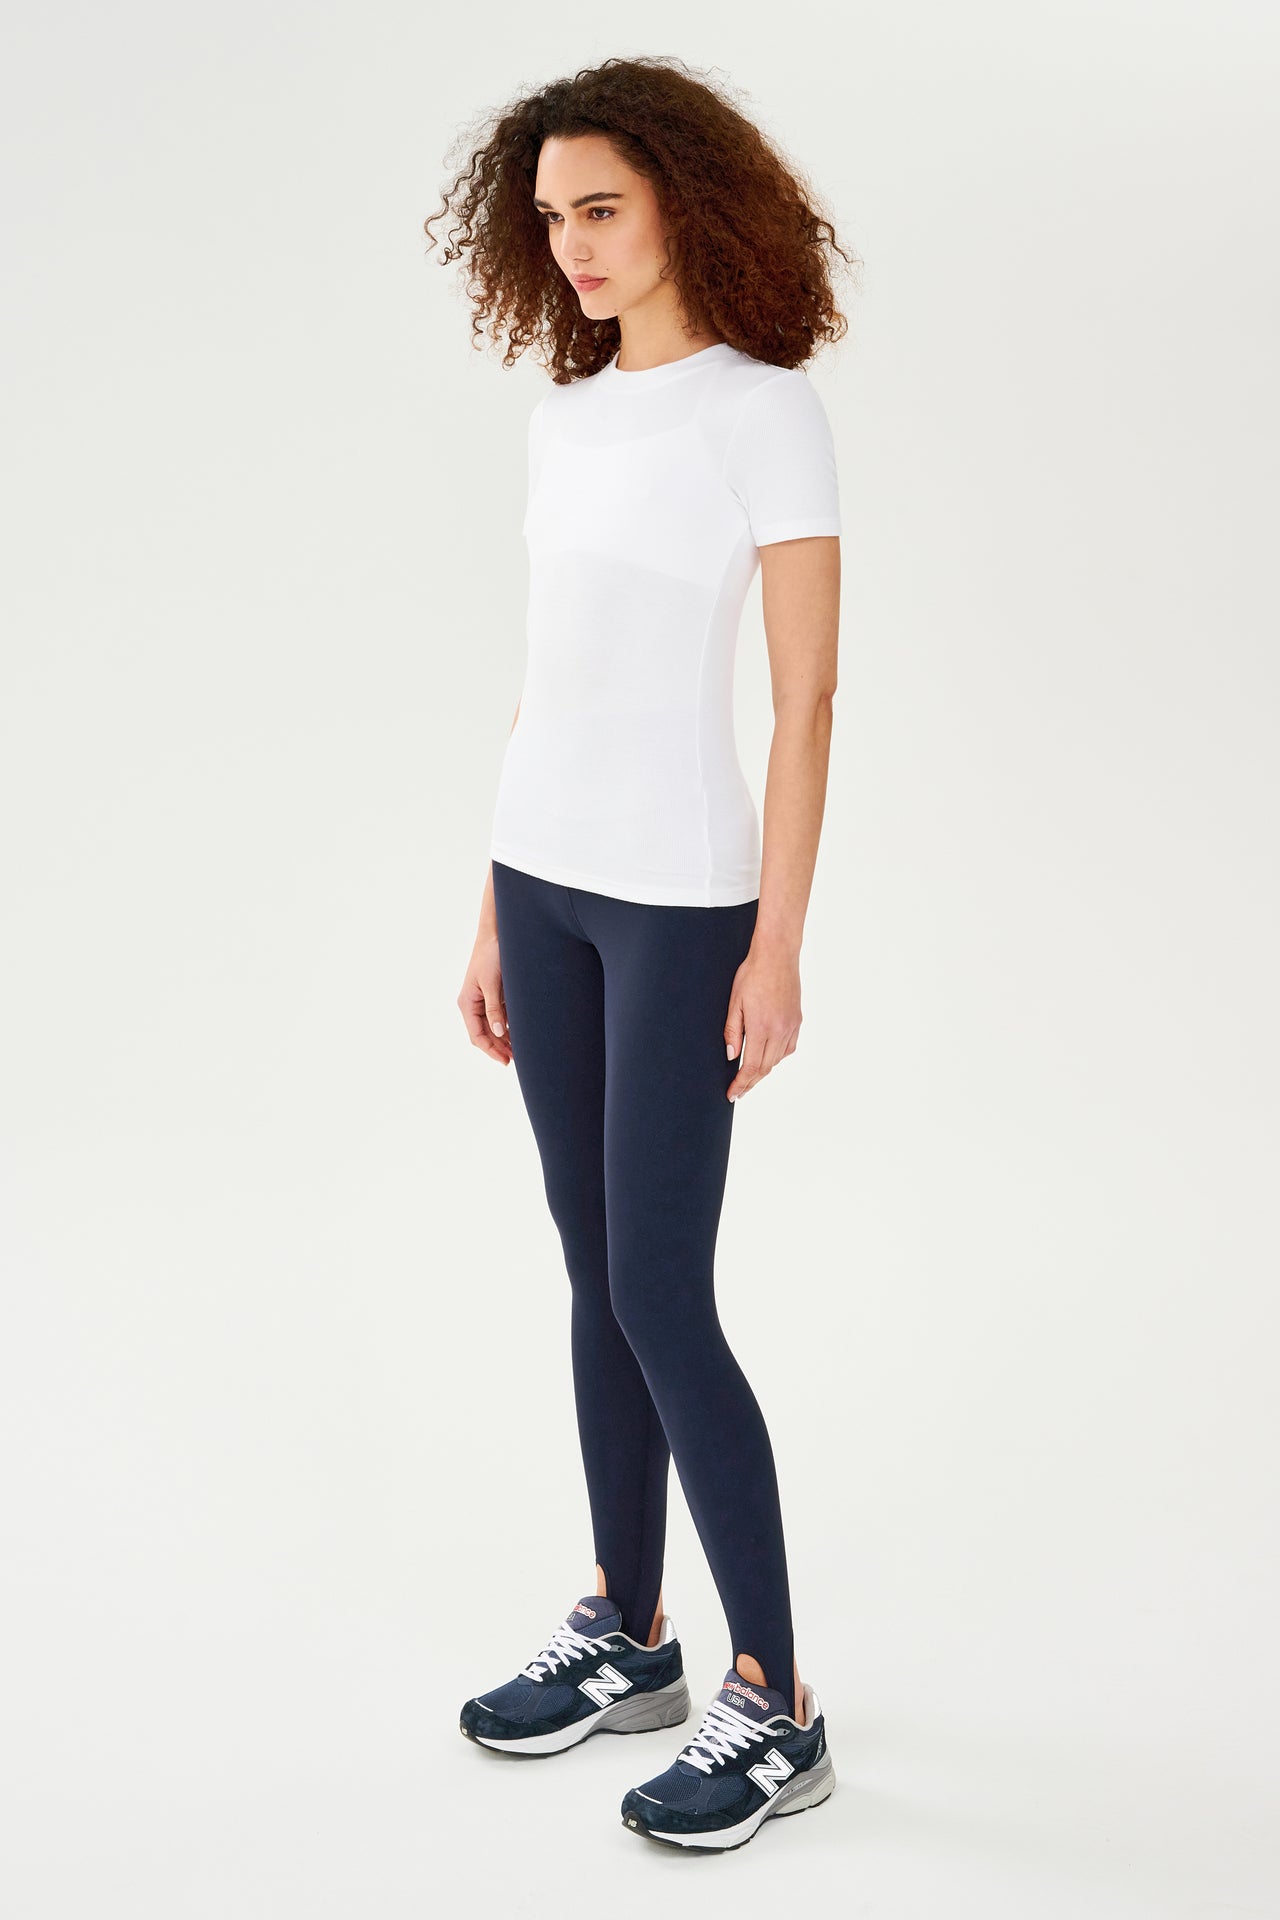 A woman wearing a SPLITS59 Louise Rib Short Sleeve - White t-shirt and black leggings, ready for her yoga session.